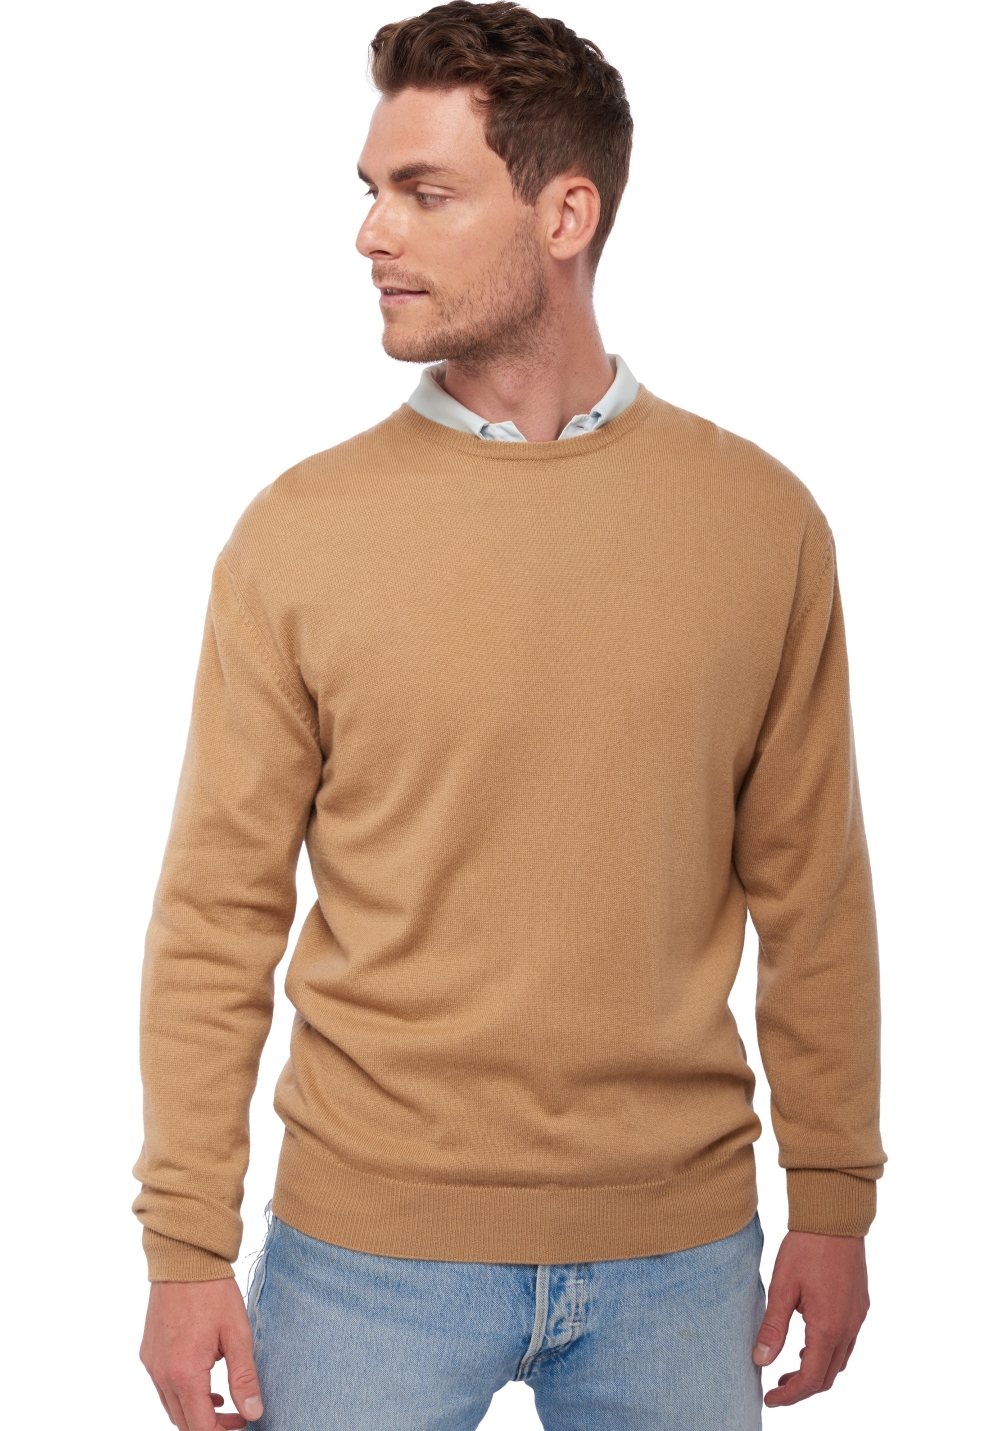 Cachemire pull homme col rond keaton camel xl